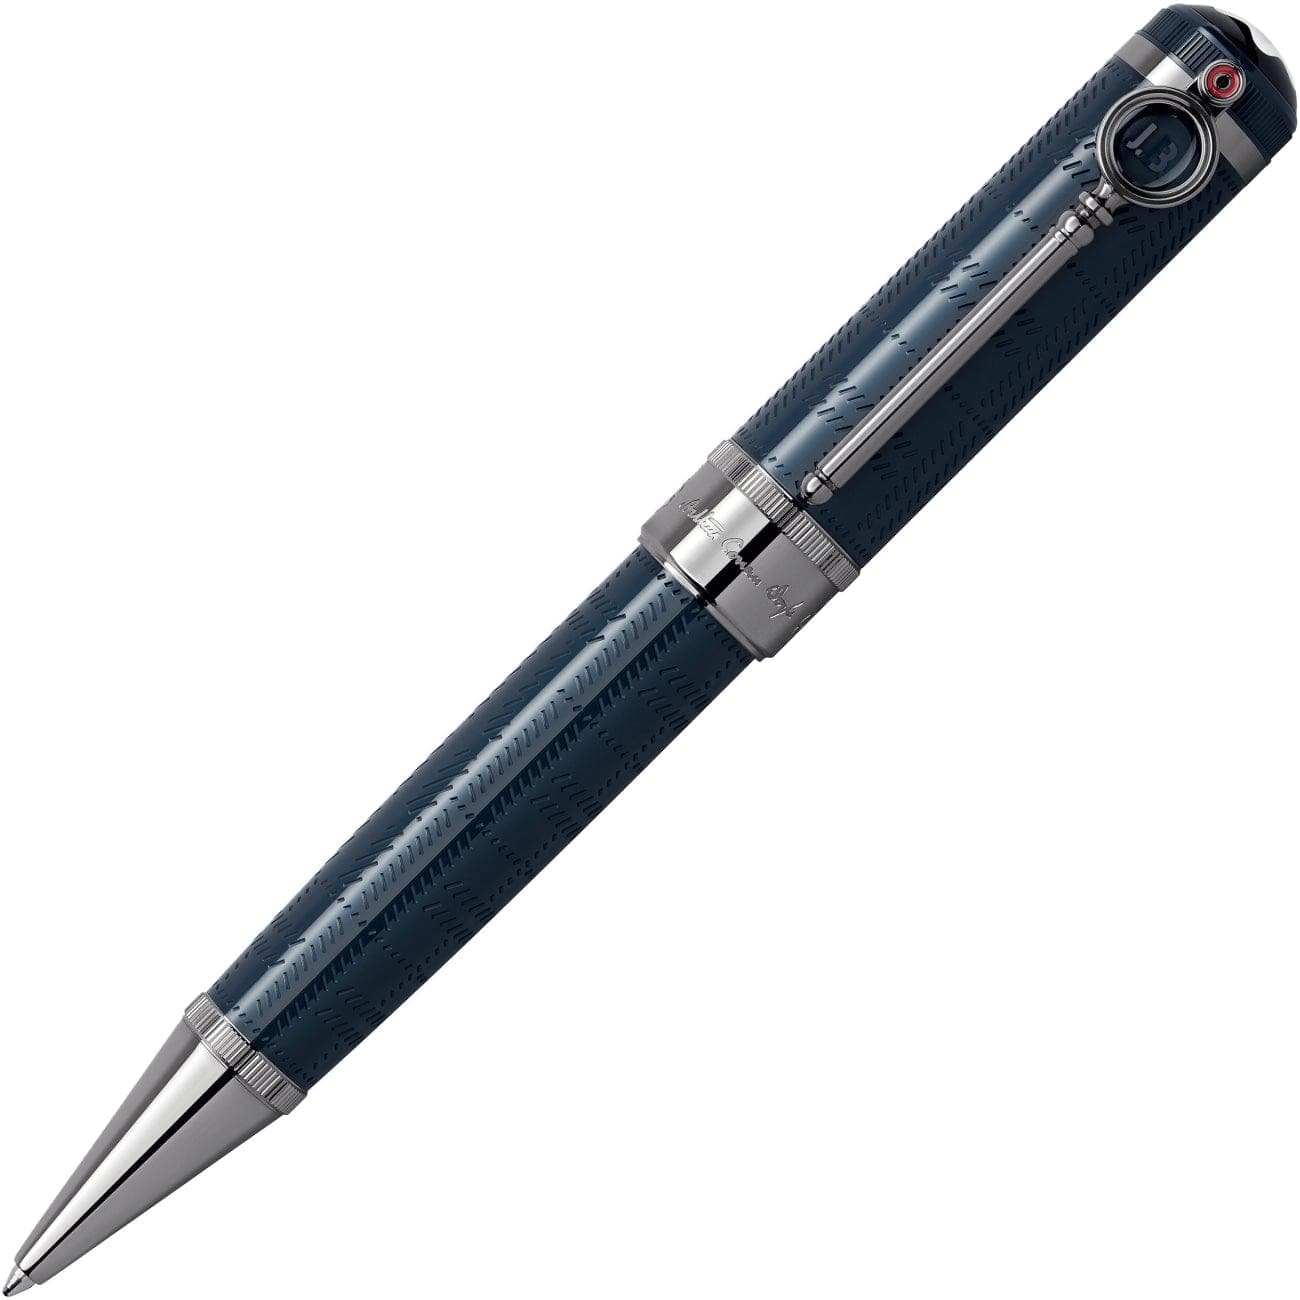 Montblanc Writers Edition Sir Arthur Conan Doyle Limited Edition -  Accessories